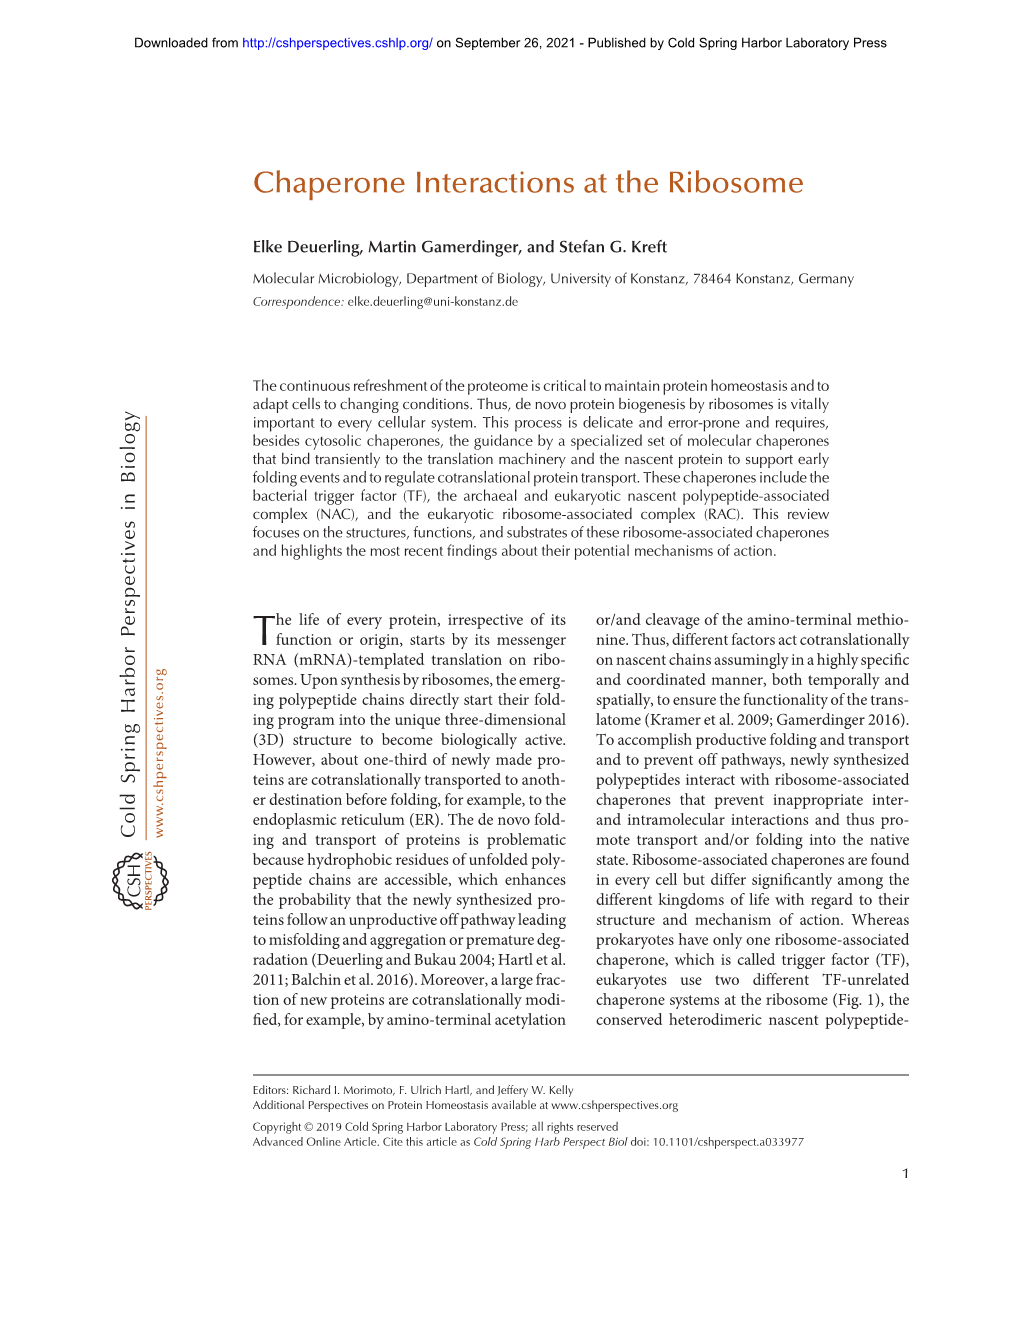 Chaperone Interactions at the Ribosome